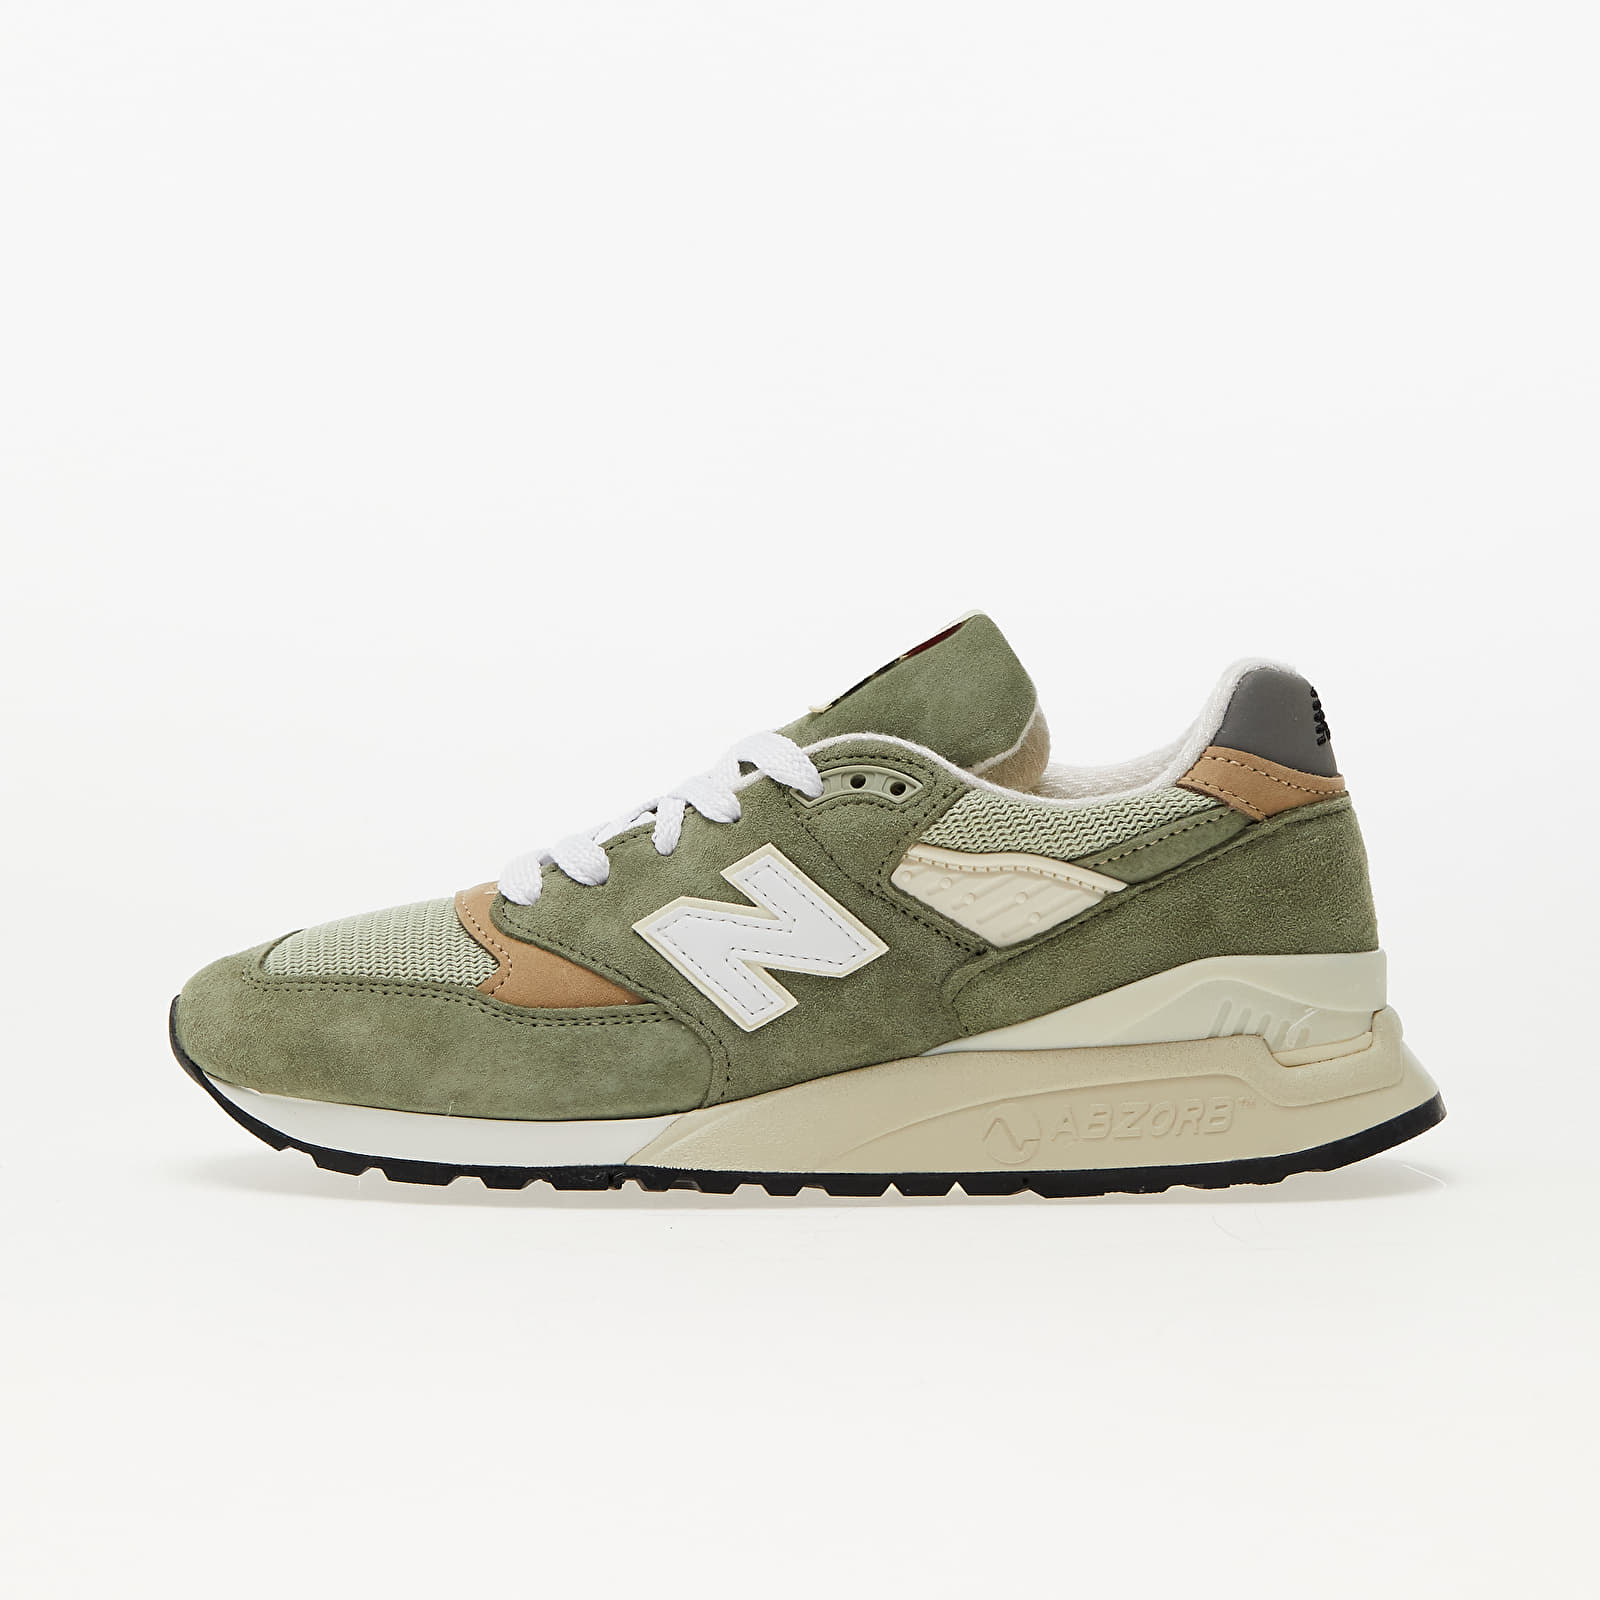 Men's shoes New Balance 998 Made in USA Olive Green